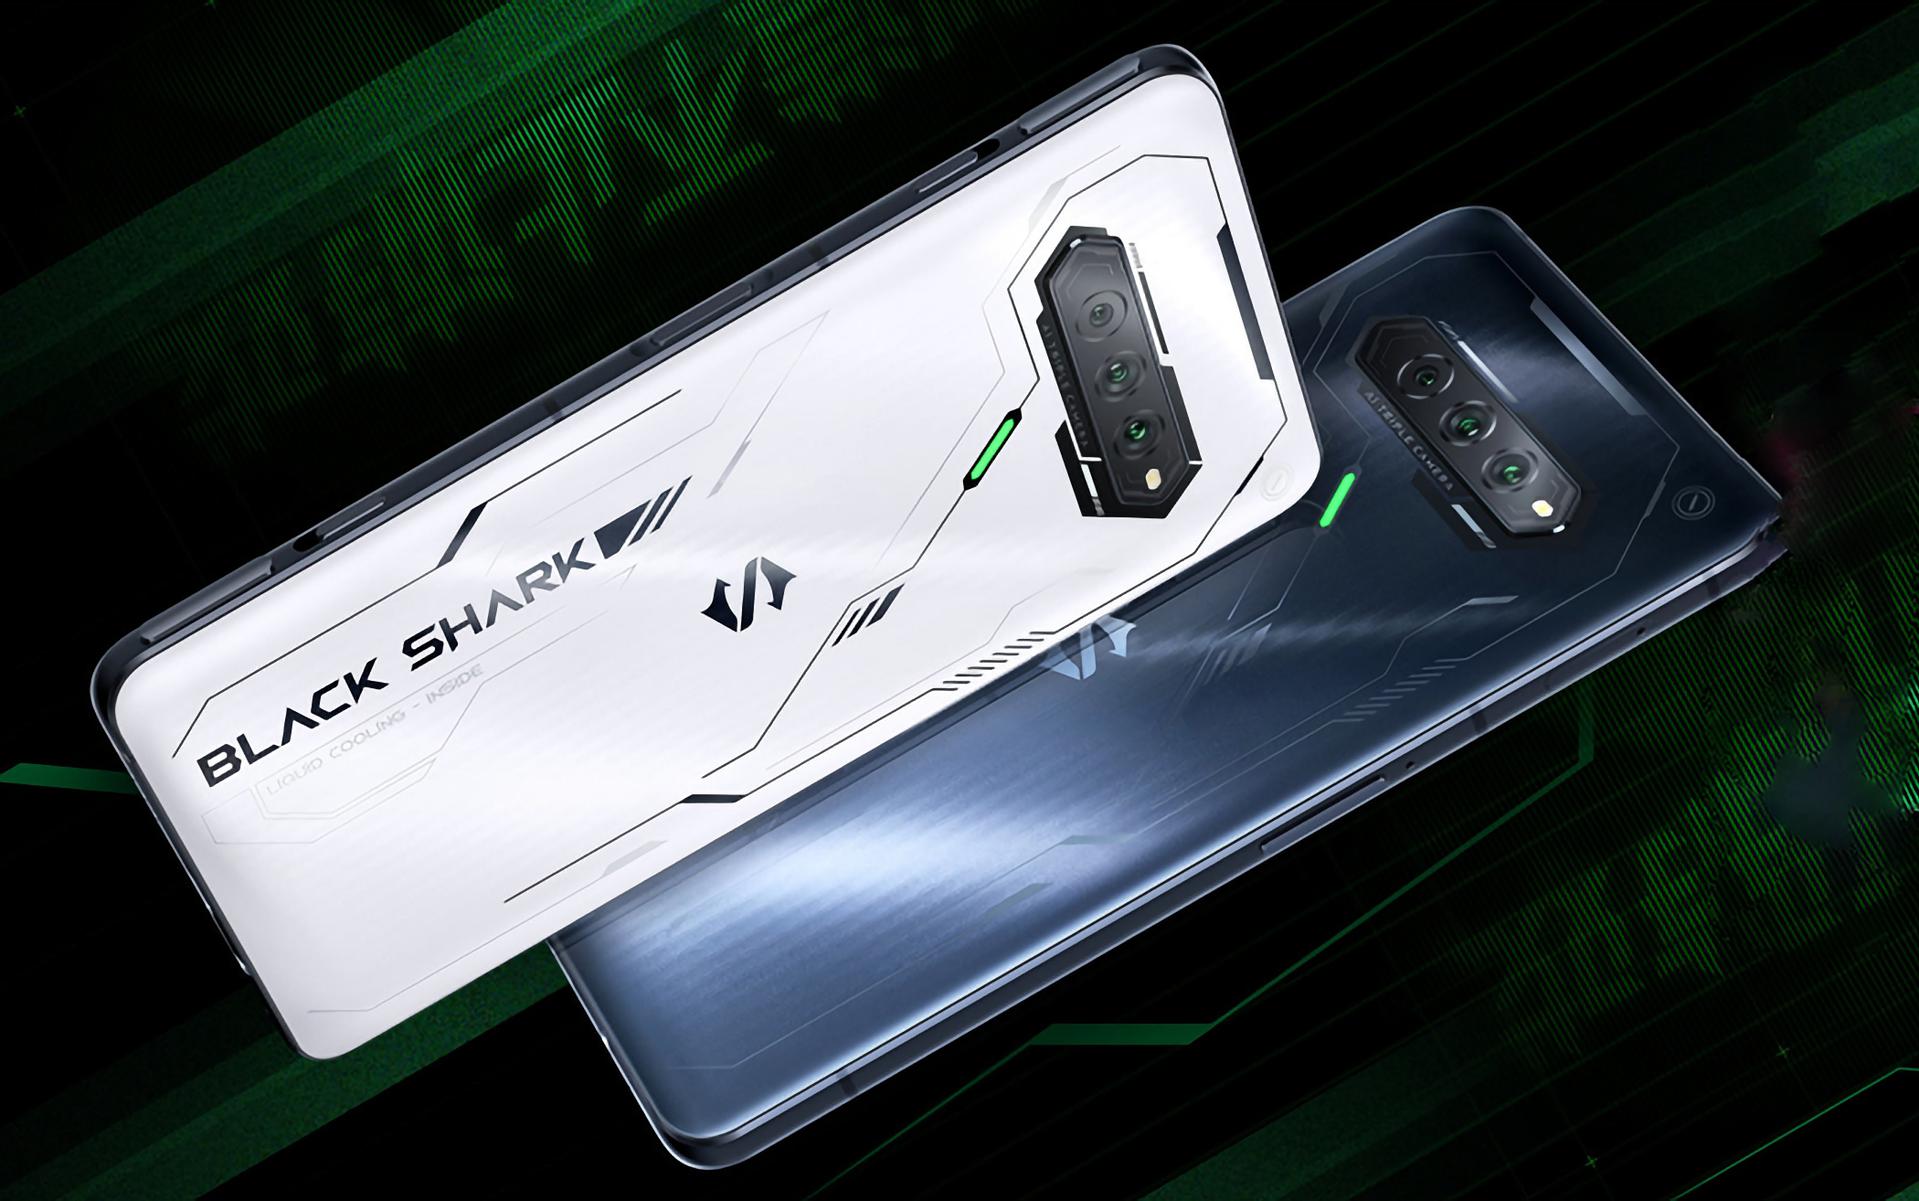 Confirmed: Xiaomi Black Shark 4S Pro gaming smartphone will get Snapdragon 888 Plus chip and 16GB RAM